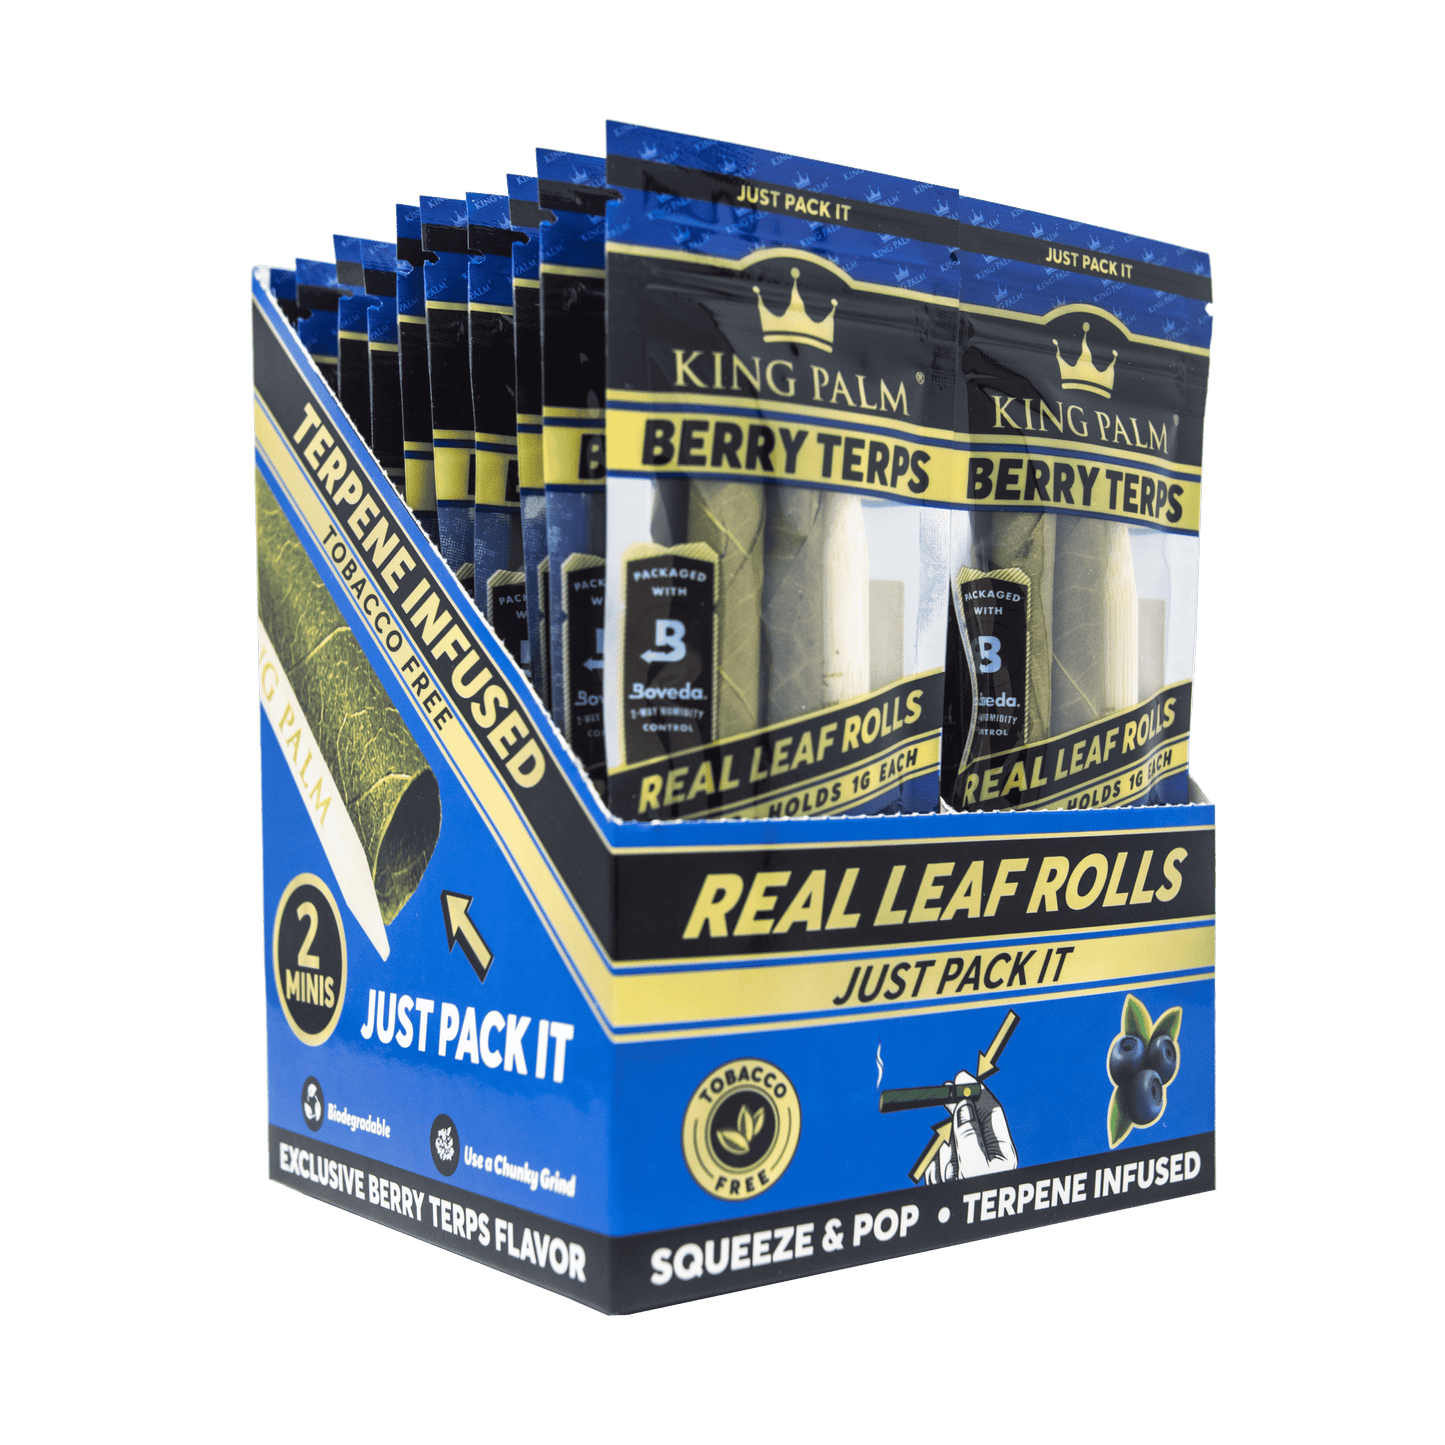 King Palm Real Leaf Rolls | 20-packs 2 minis | Berry Terps with Packaging